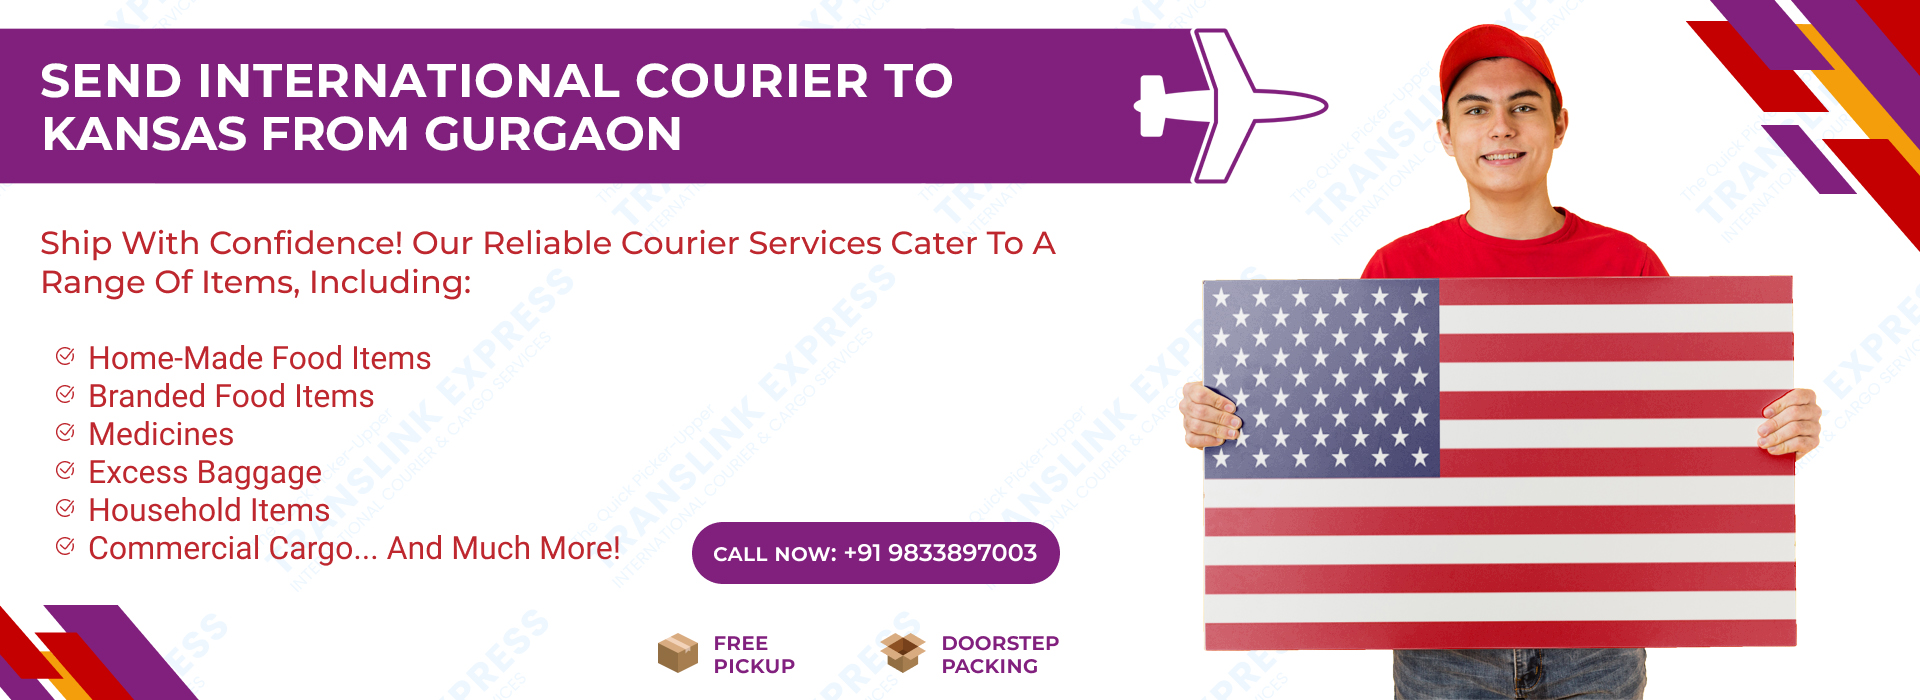 Courier to Kansas From Gurgaon